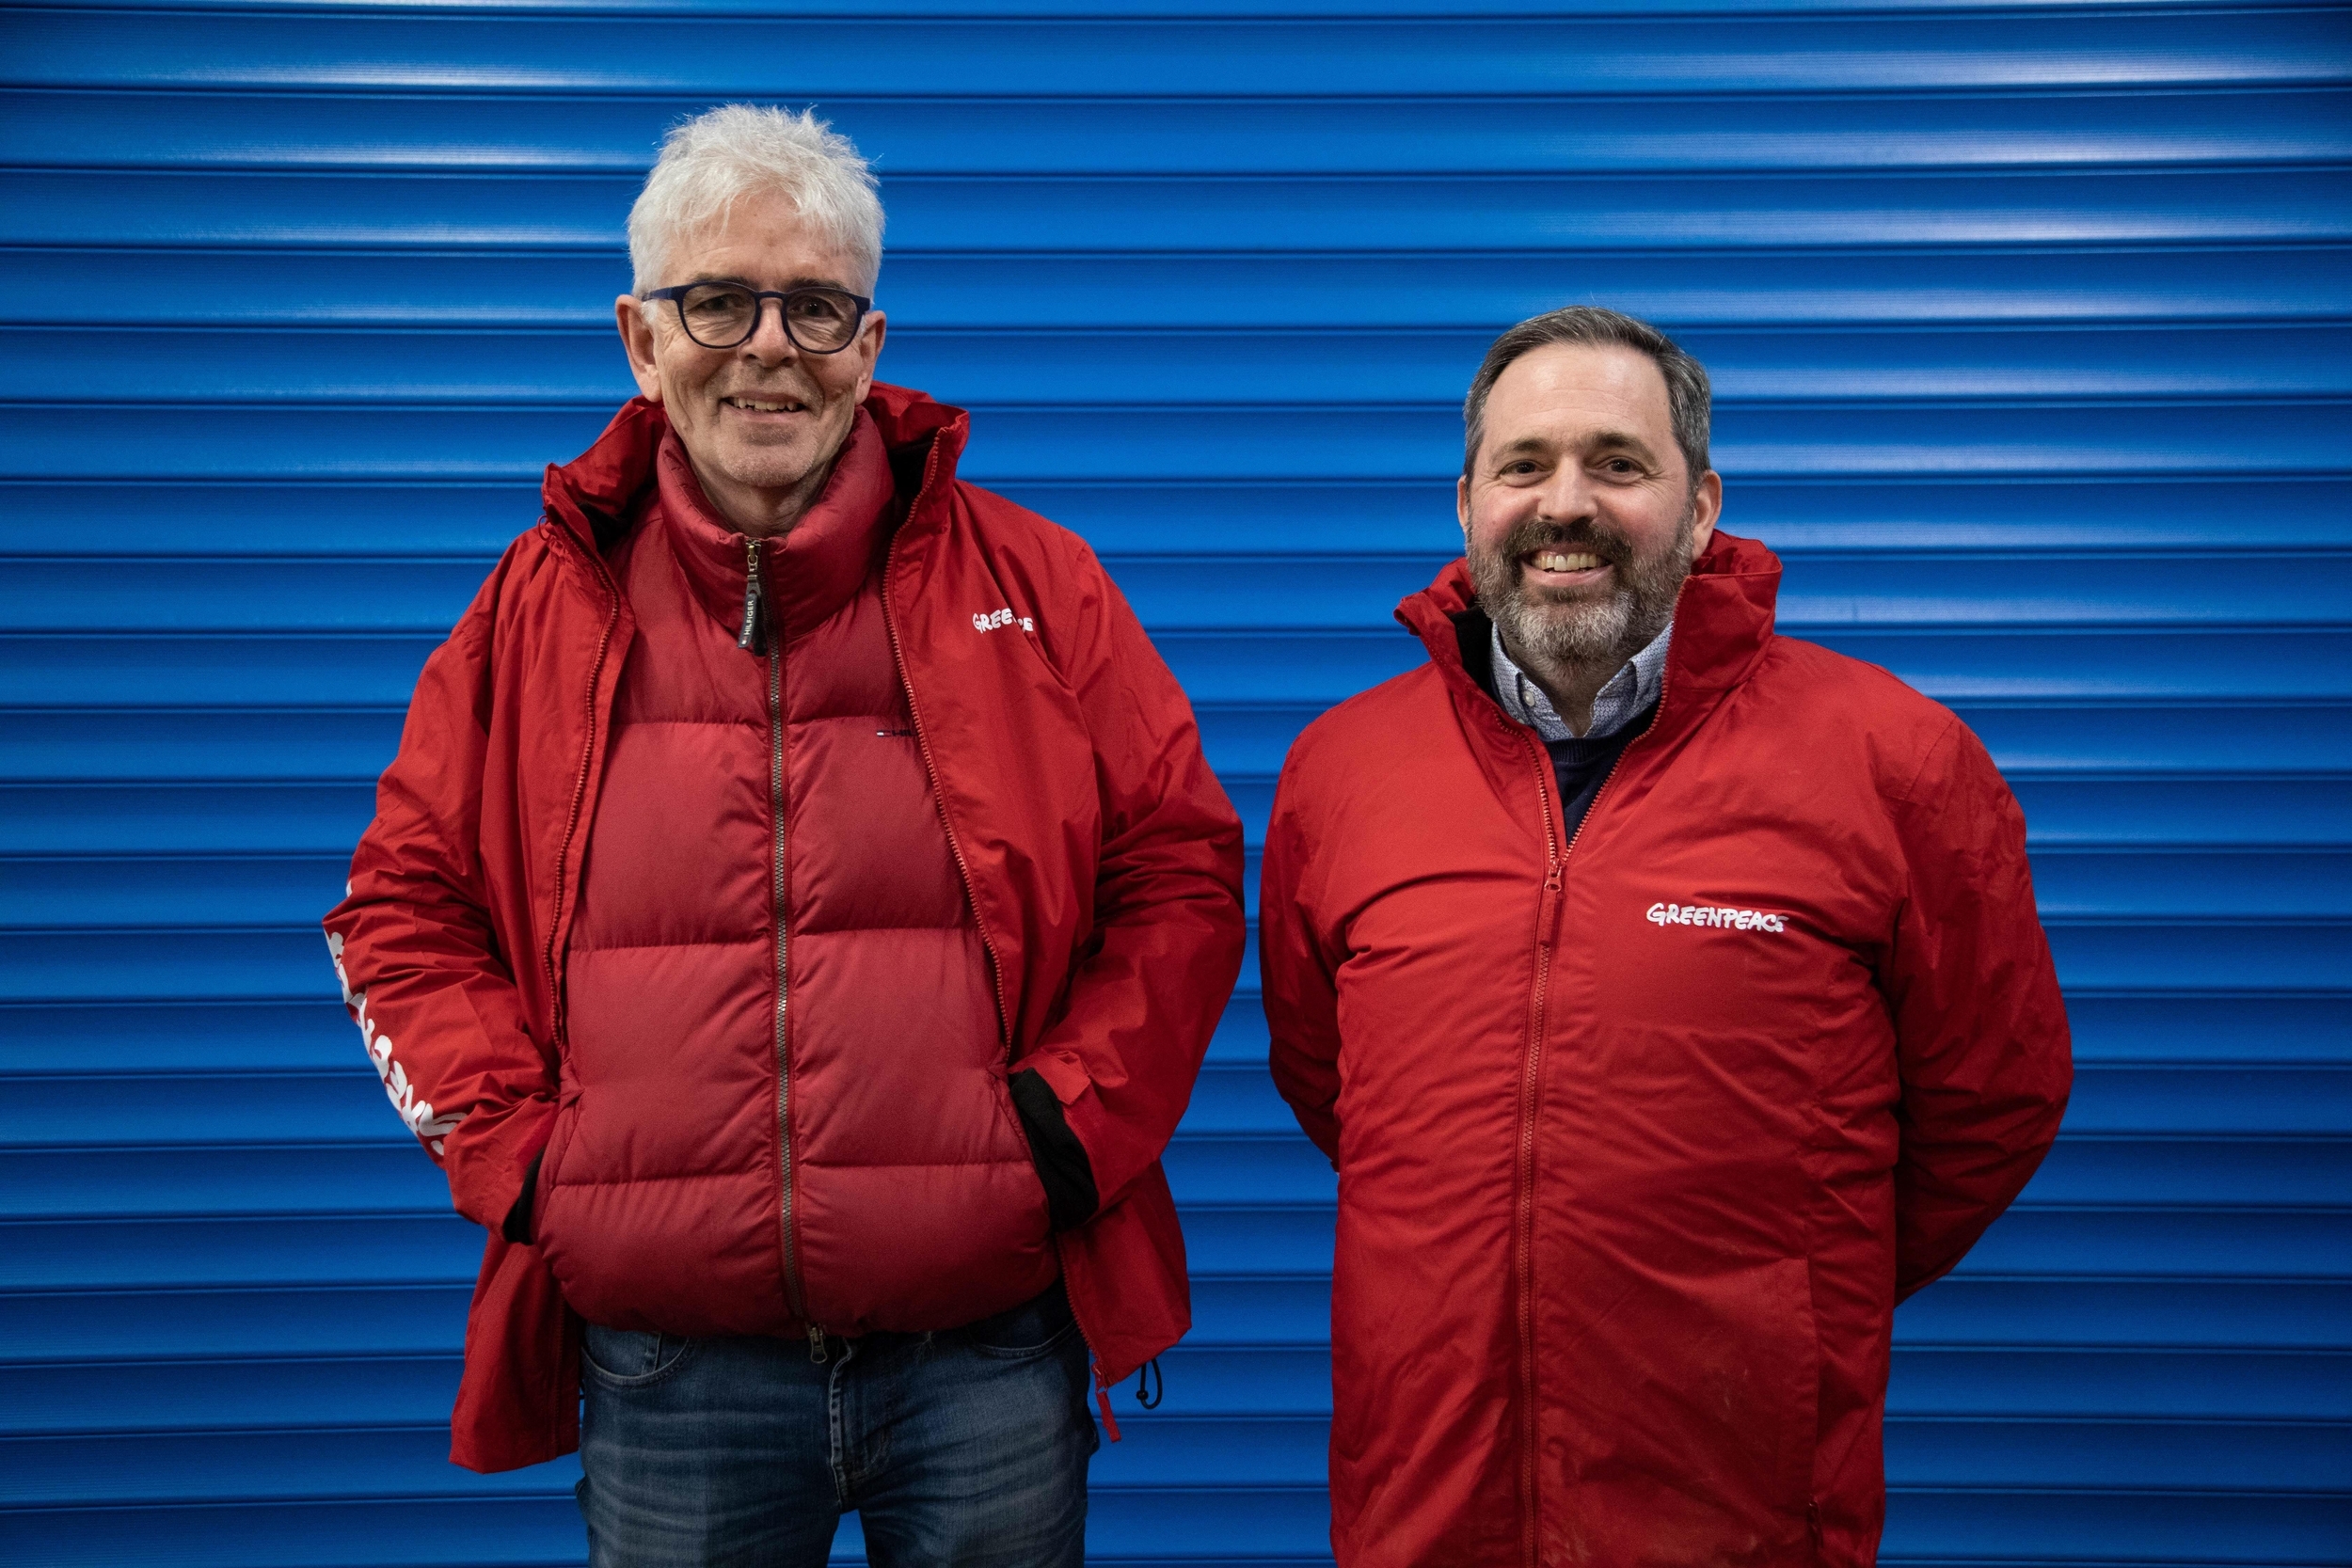 John Sauven with Pat Venditti, Greenpeace UK. The two men stand in bright red jackets against a deep blue background.